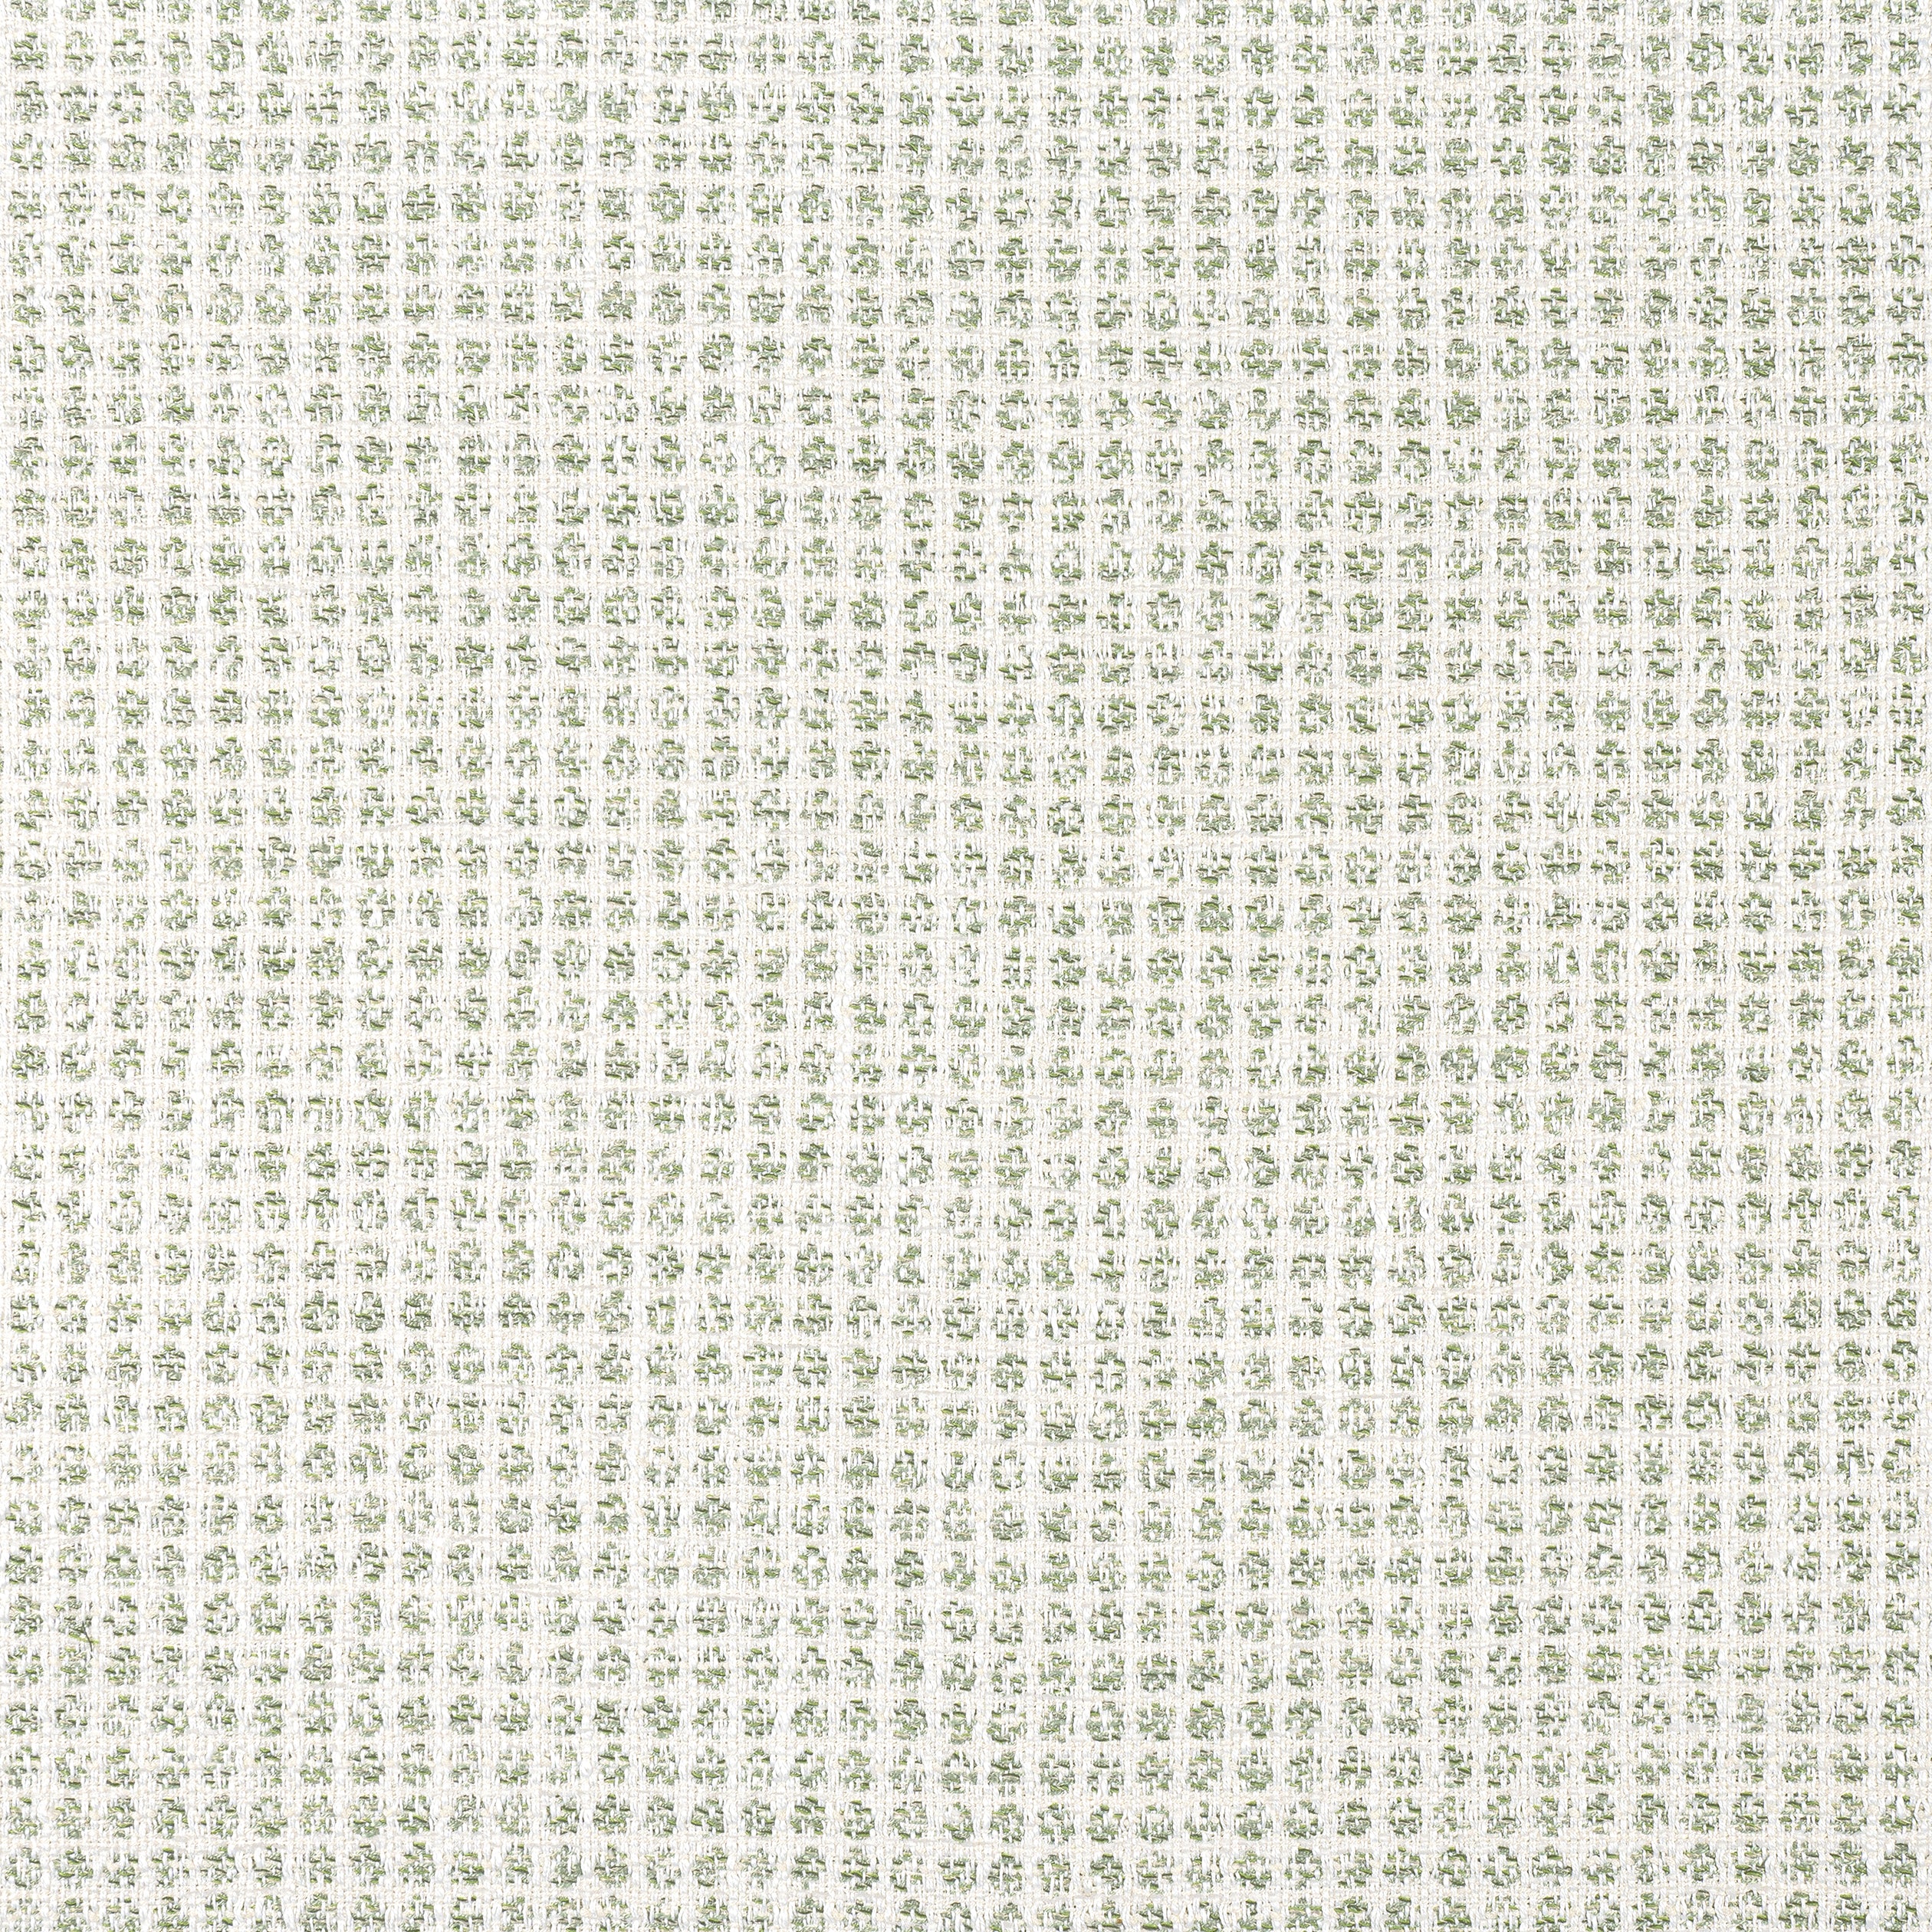 Remy Dot fabric in aloe color - pattern number W8703 - by Thibaut in the Haven collection